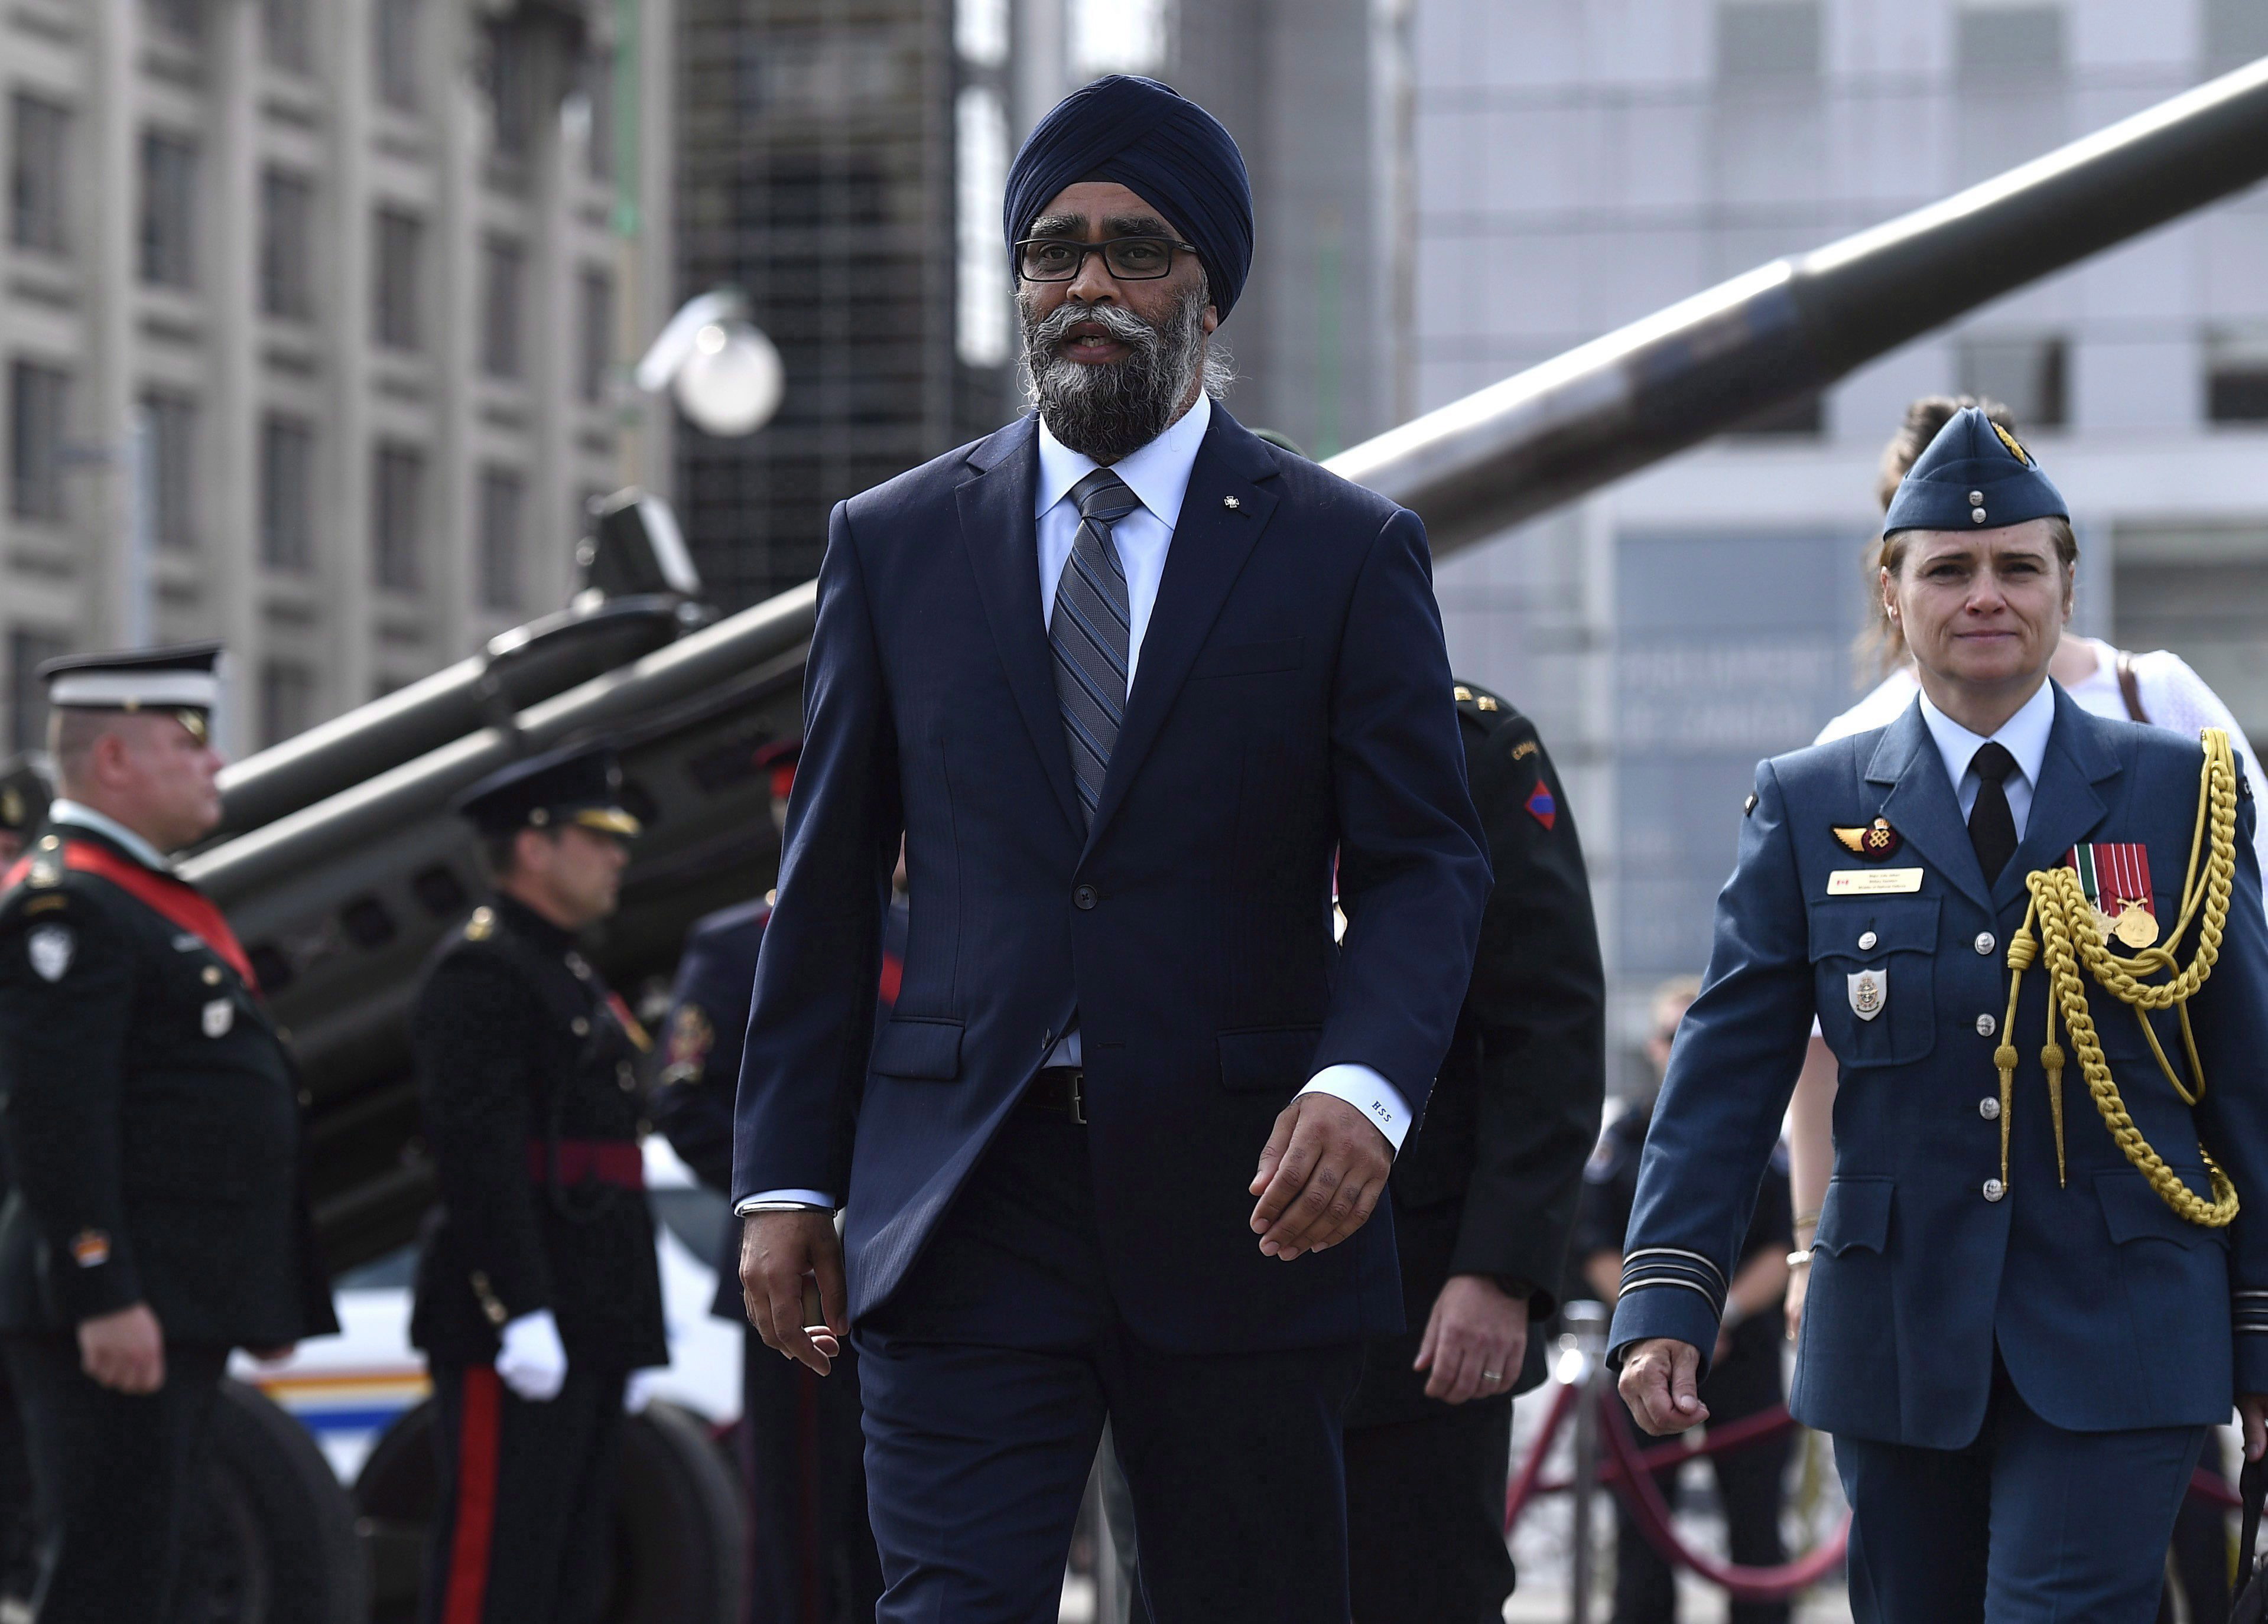 Canadian Minister of International Development Harjit Sajjan will attend a ministerial conference on global food security in Berlin today.